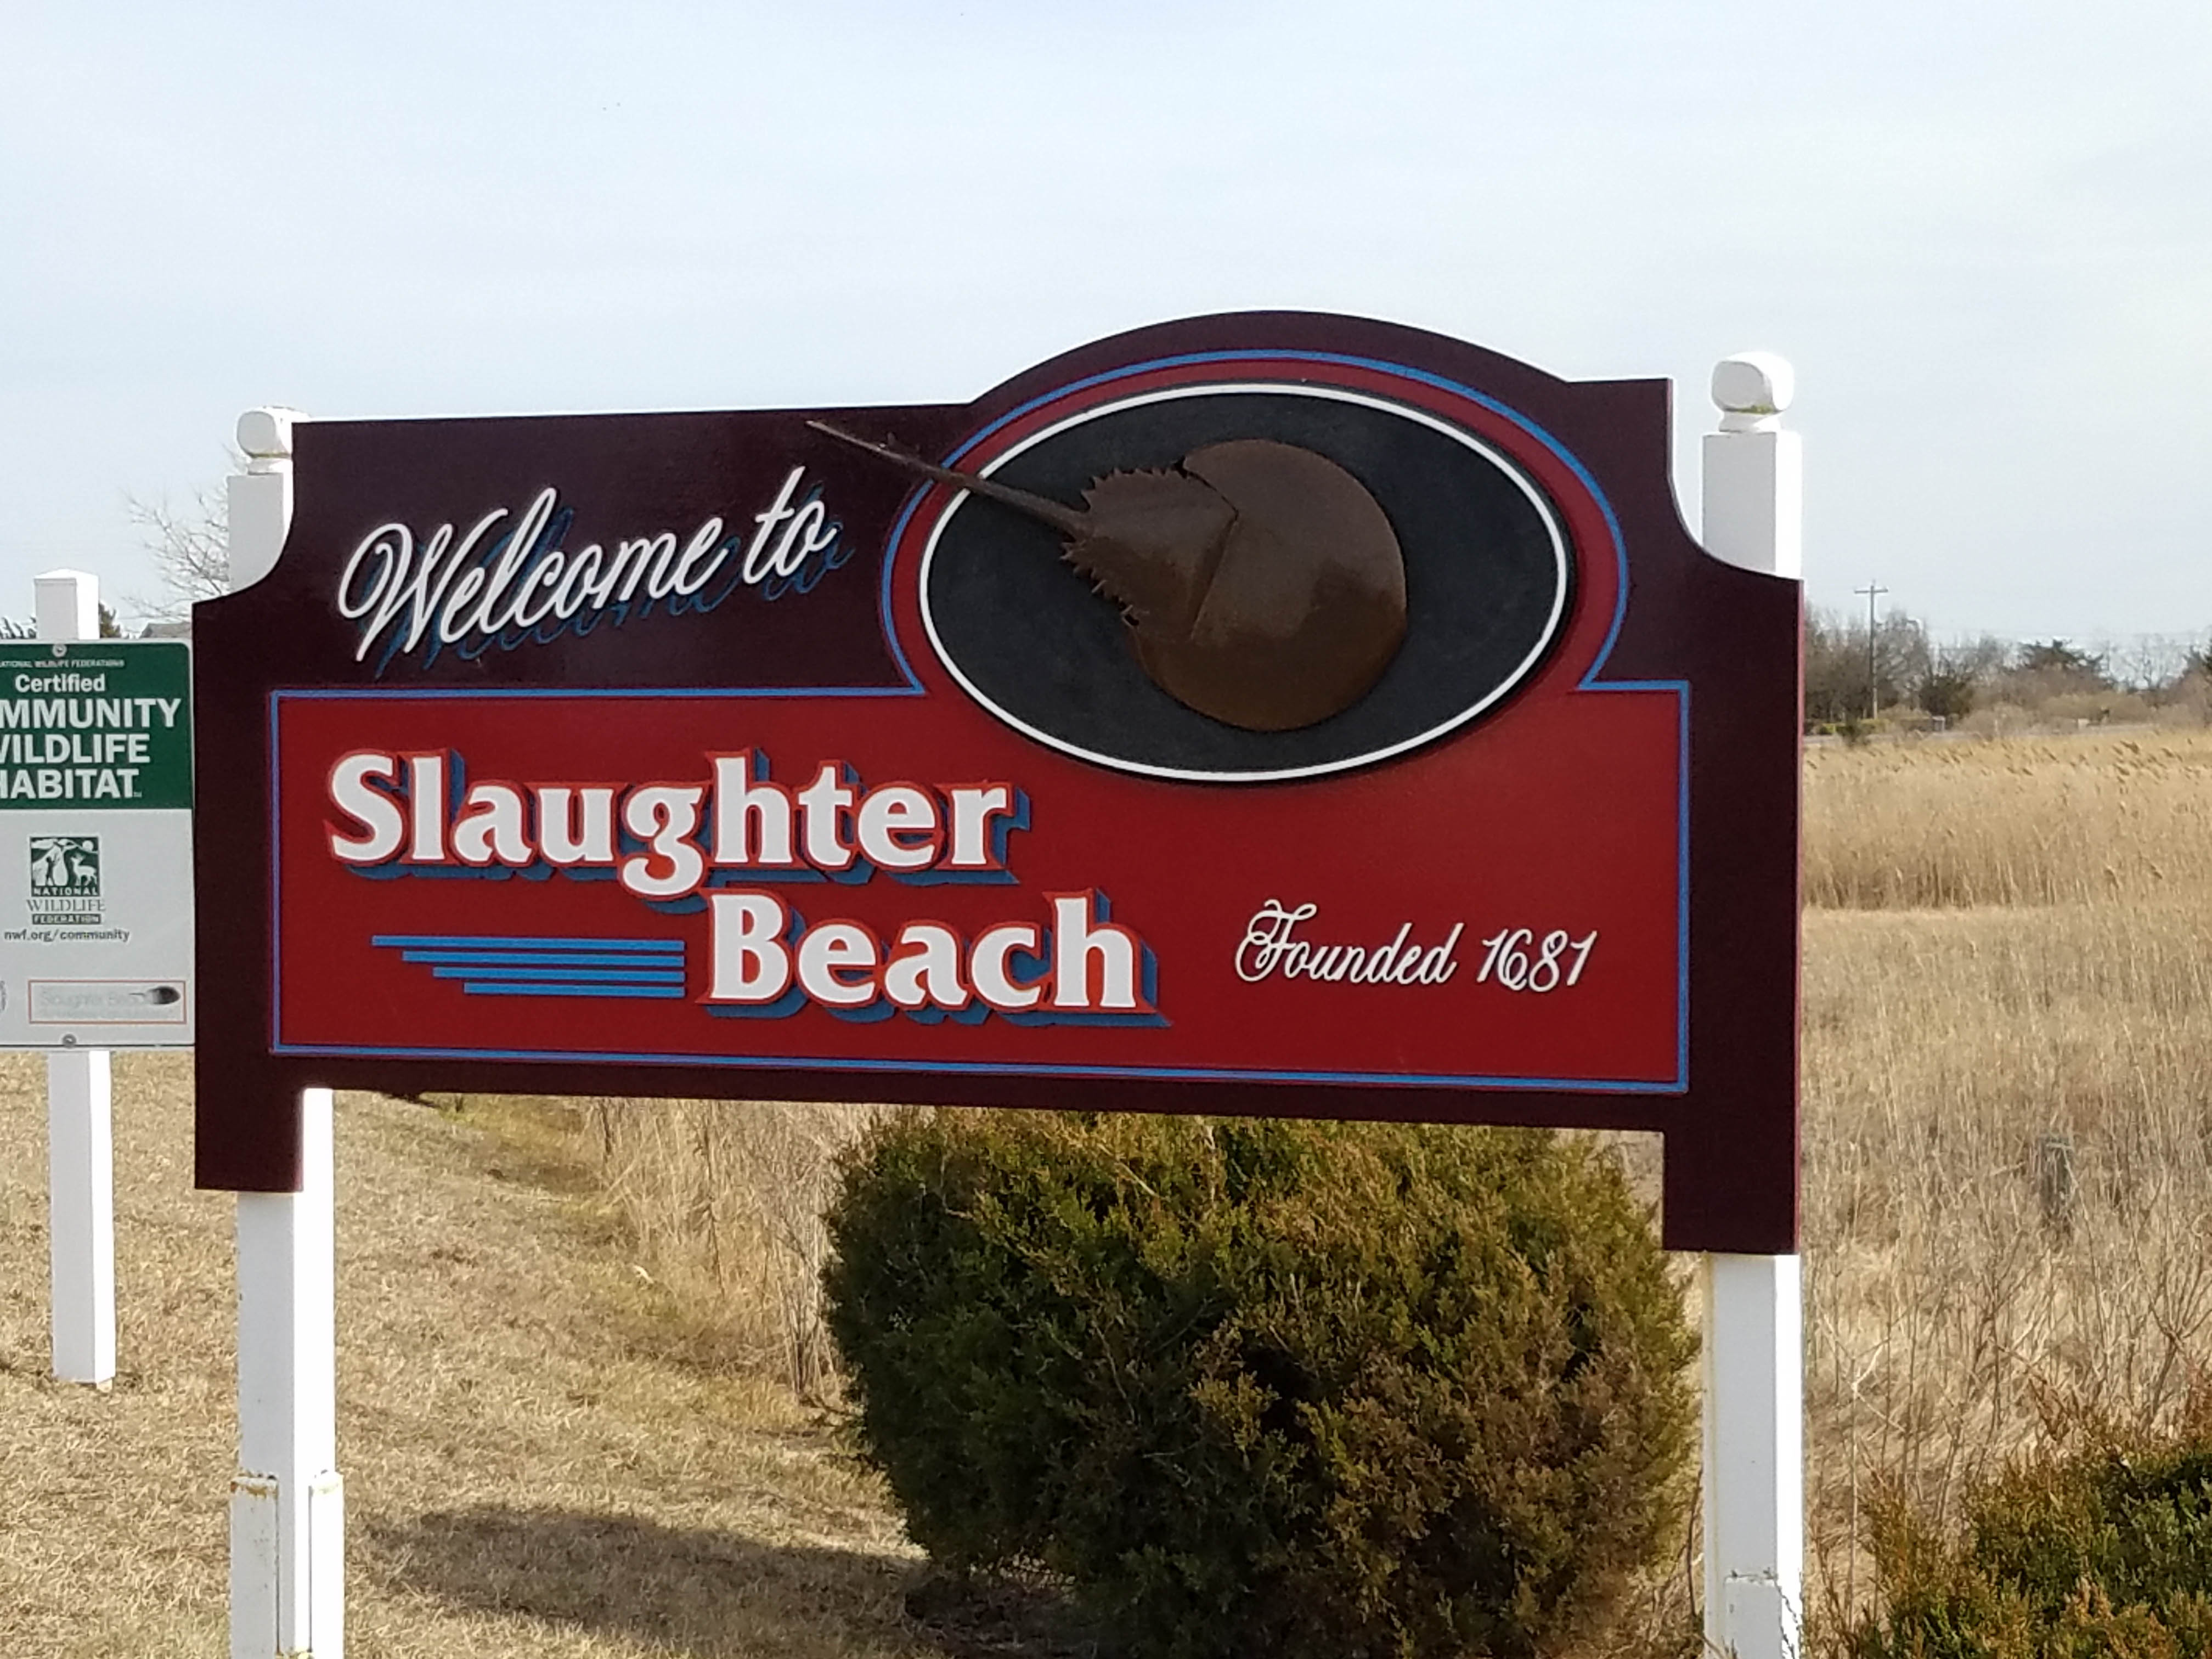 Slaughter Beach, in Delaware, is a quiet beach, that is known for the wildlife, including being a horseshoe crab sanctuary